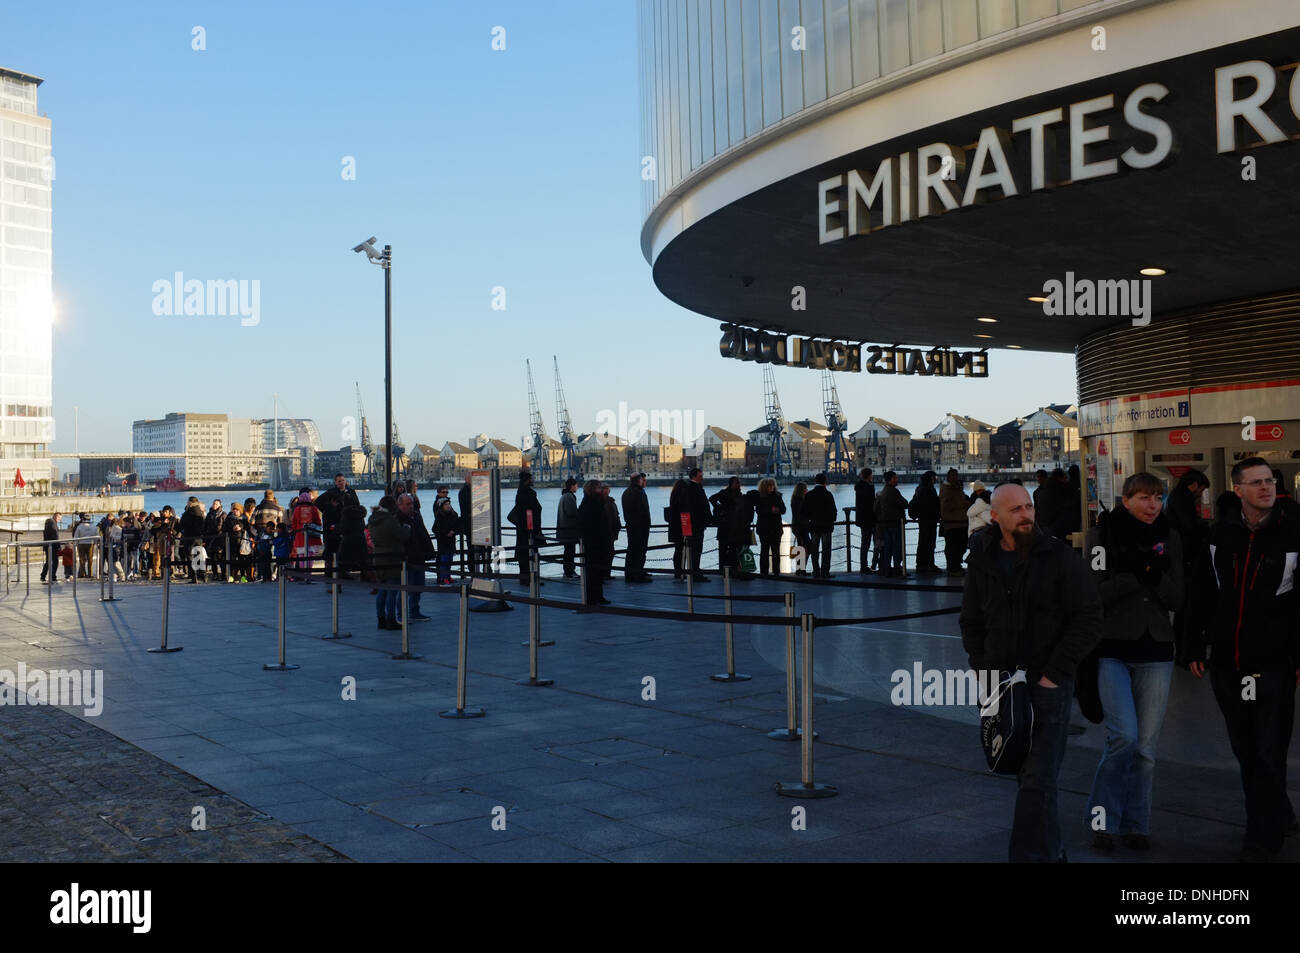 A queue at the Emirates Royal Docks terminal booking office for the Emirates Air Line Stock Photo